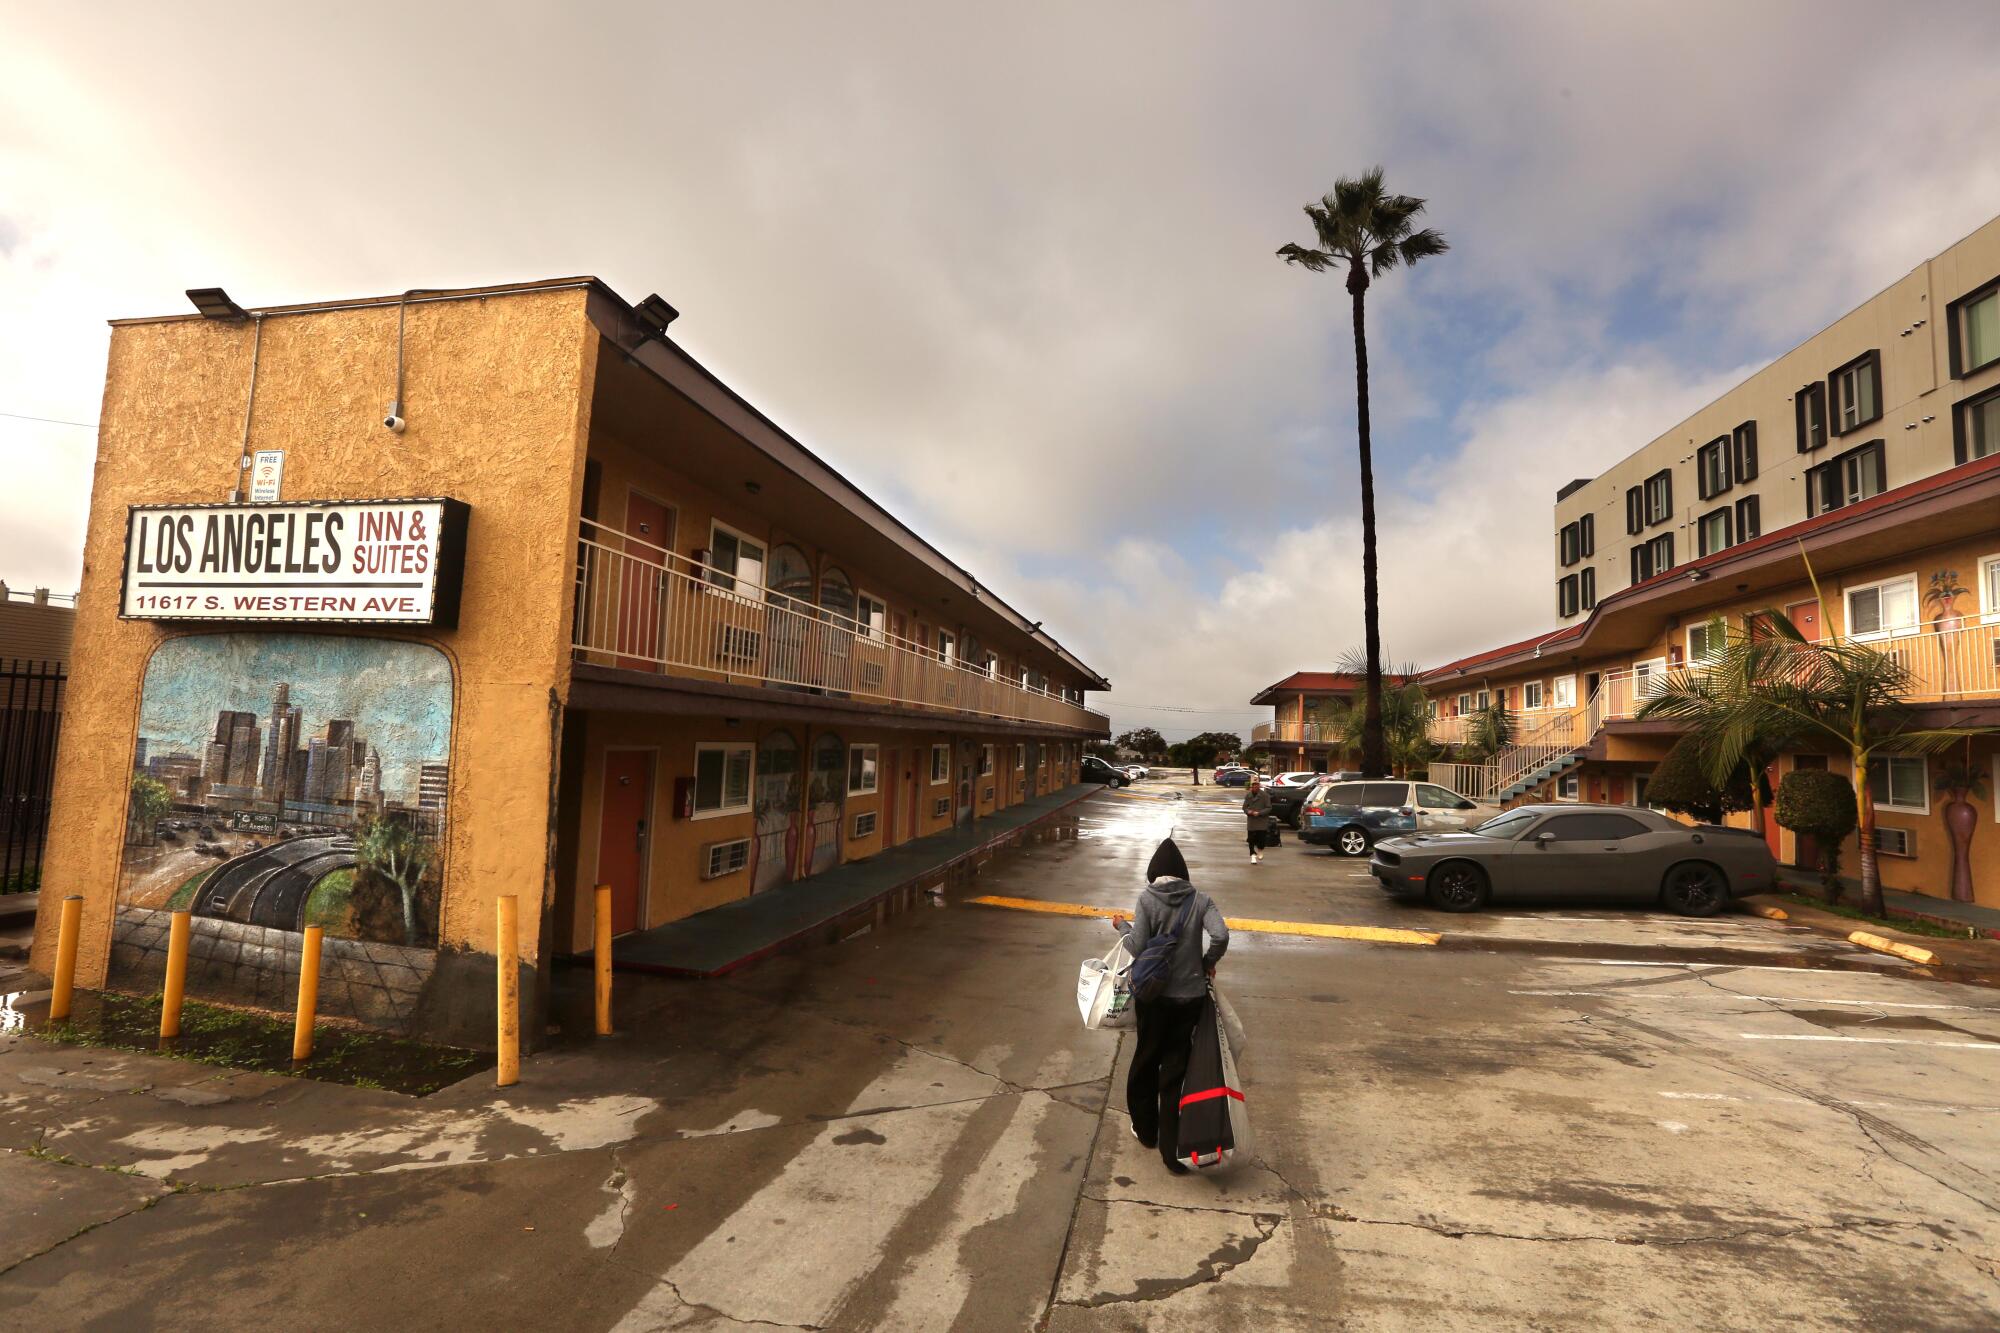 A person, seen from behind, carries bags while walking alongside a building with a sign that says Los Angeles Inn & Suites